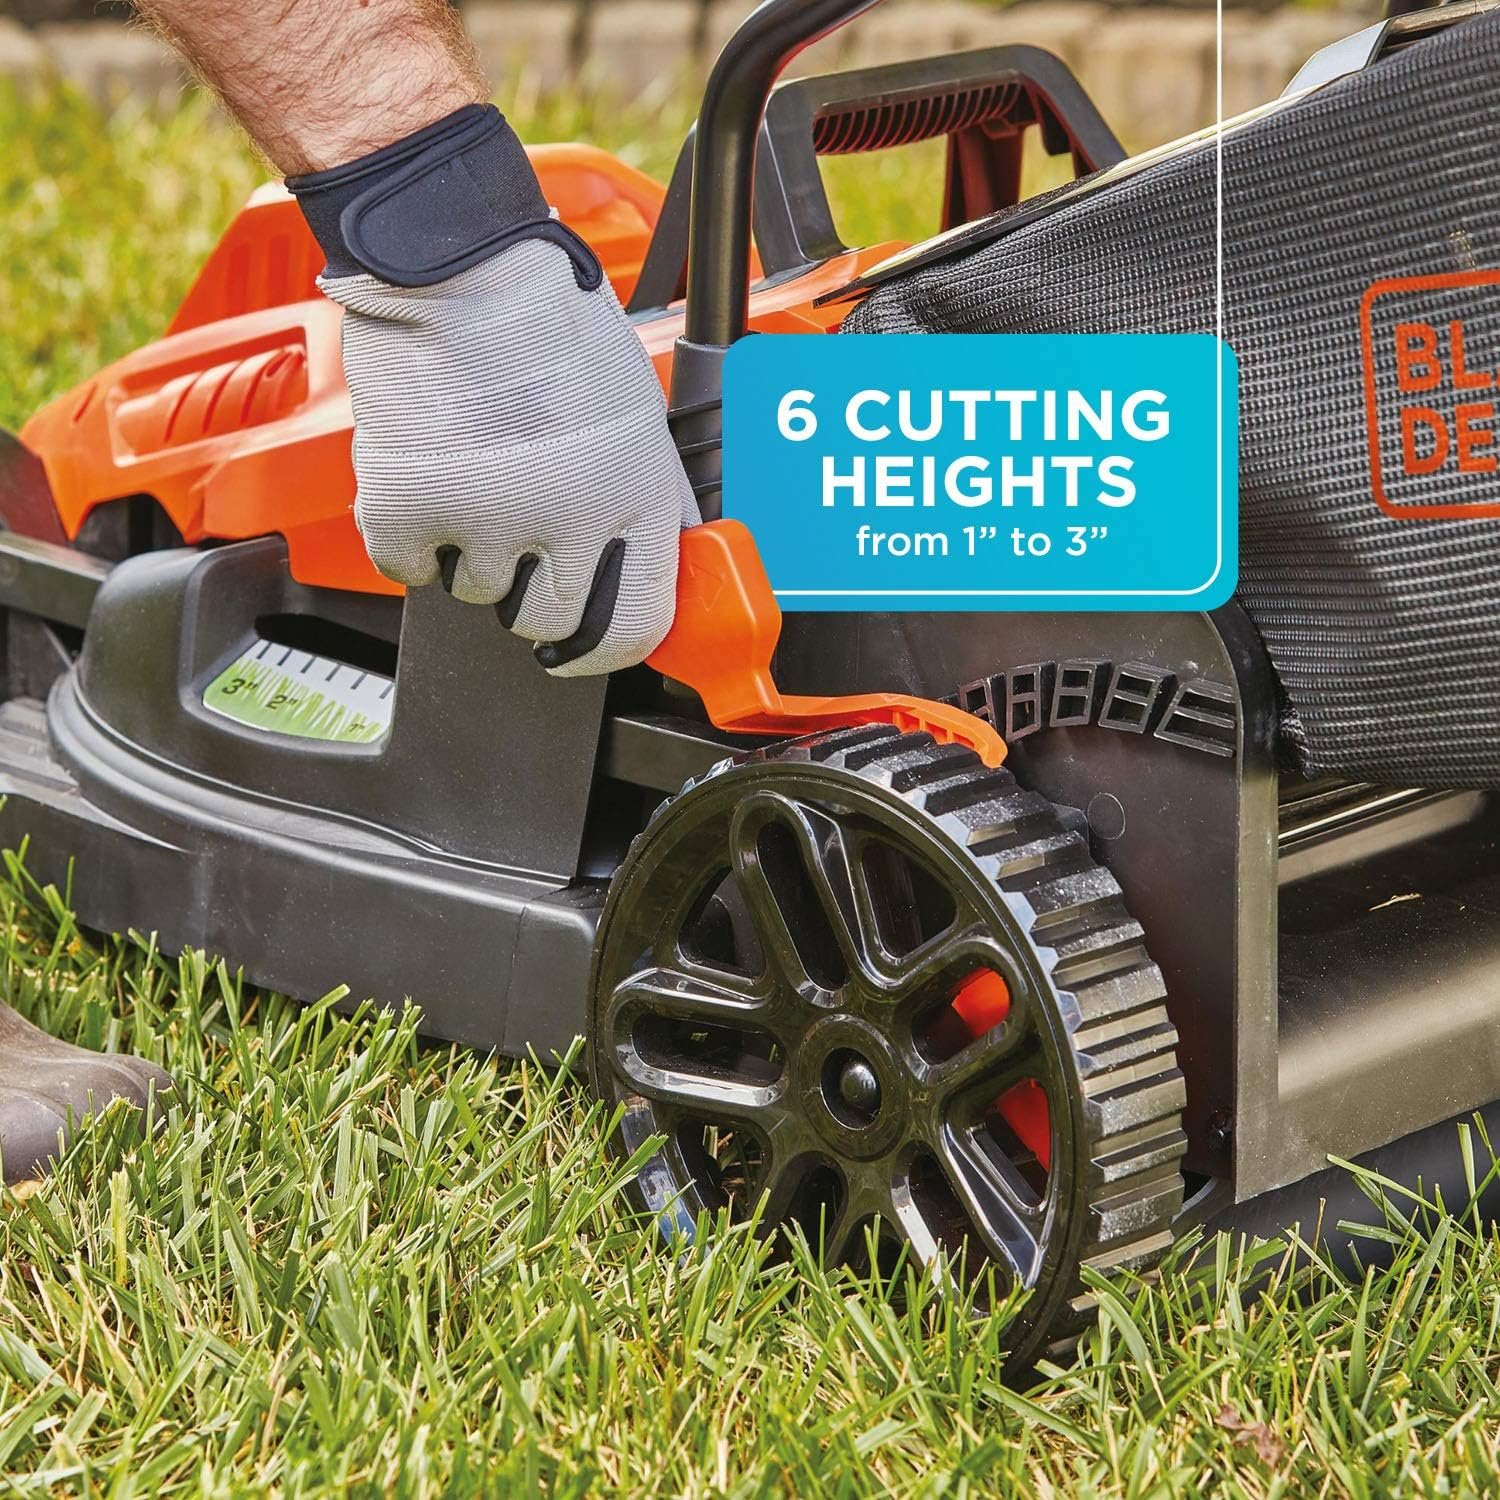 BLACK+DECKER Electric Lawn Mower 12-Amp 17-Inch Review